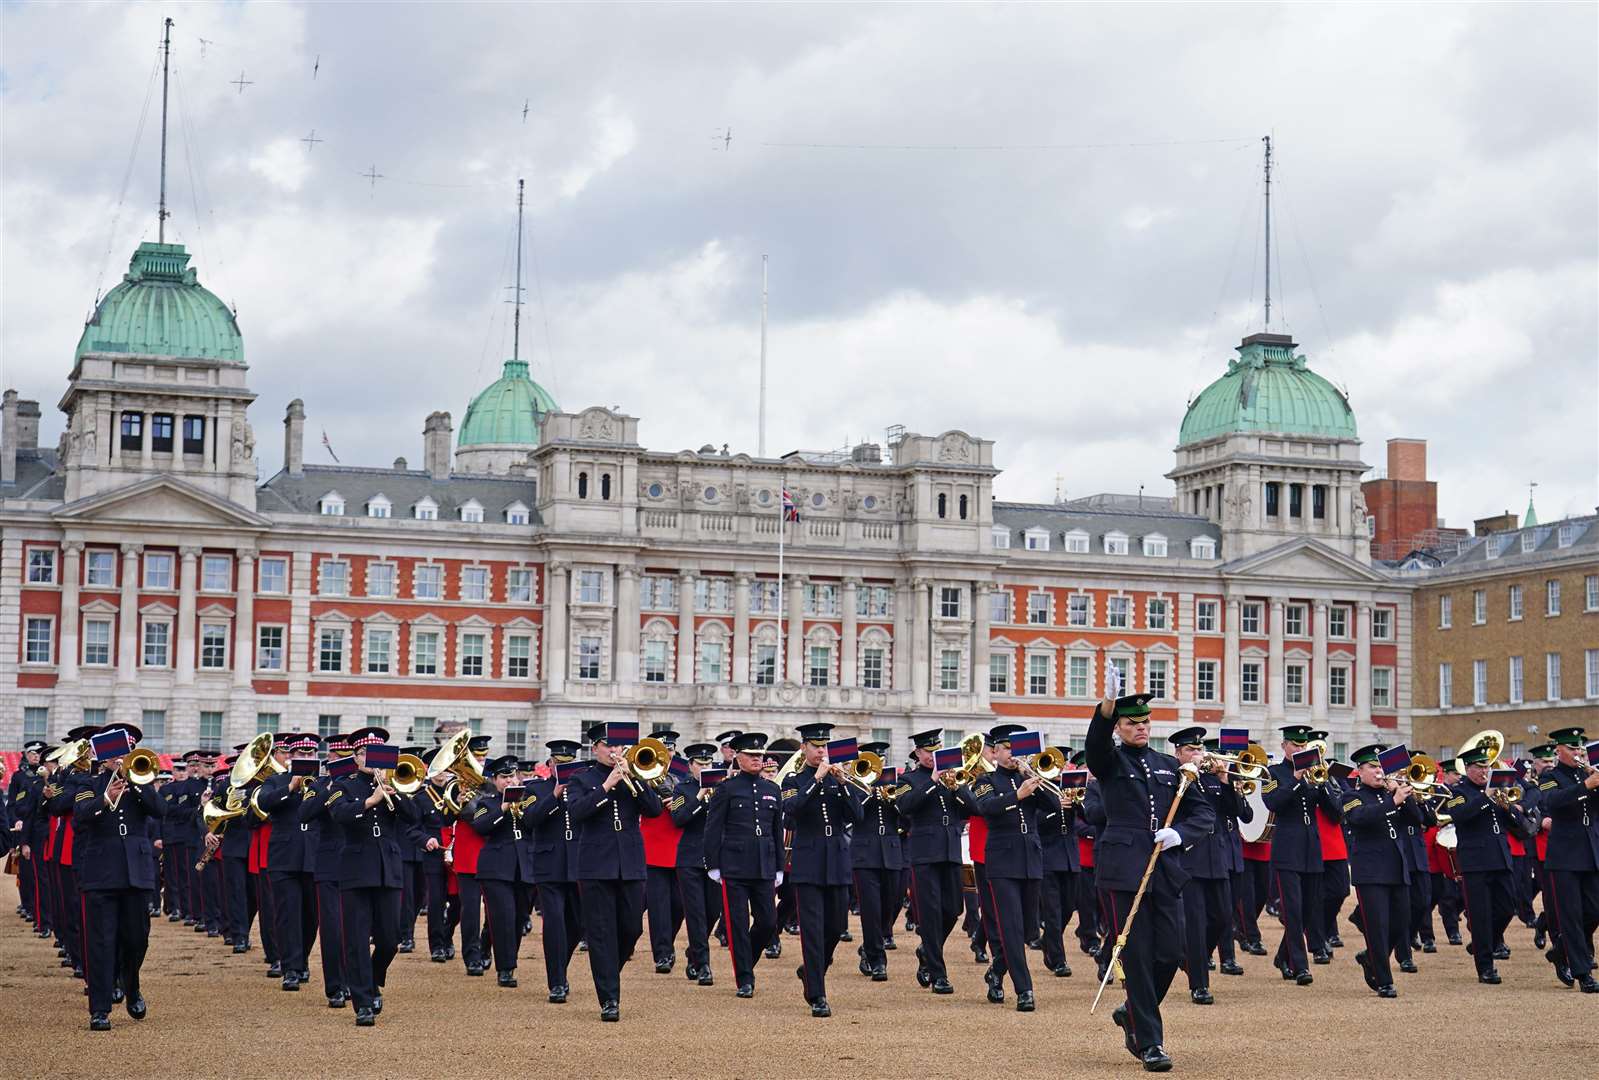 Military personnel at the Brigade Major’s Review, the final rehearsal of the Trooping the Colour, the Queen’s annual birthday parade, on Horse Guards Parade, Whitehall (Dominic Lipinski/PA)